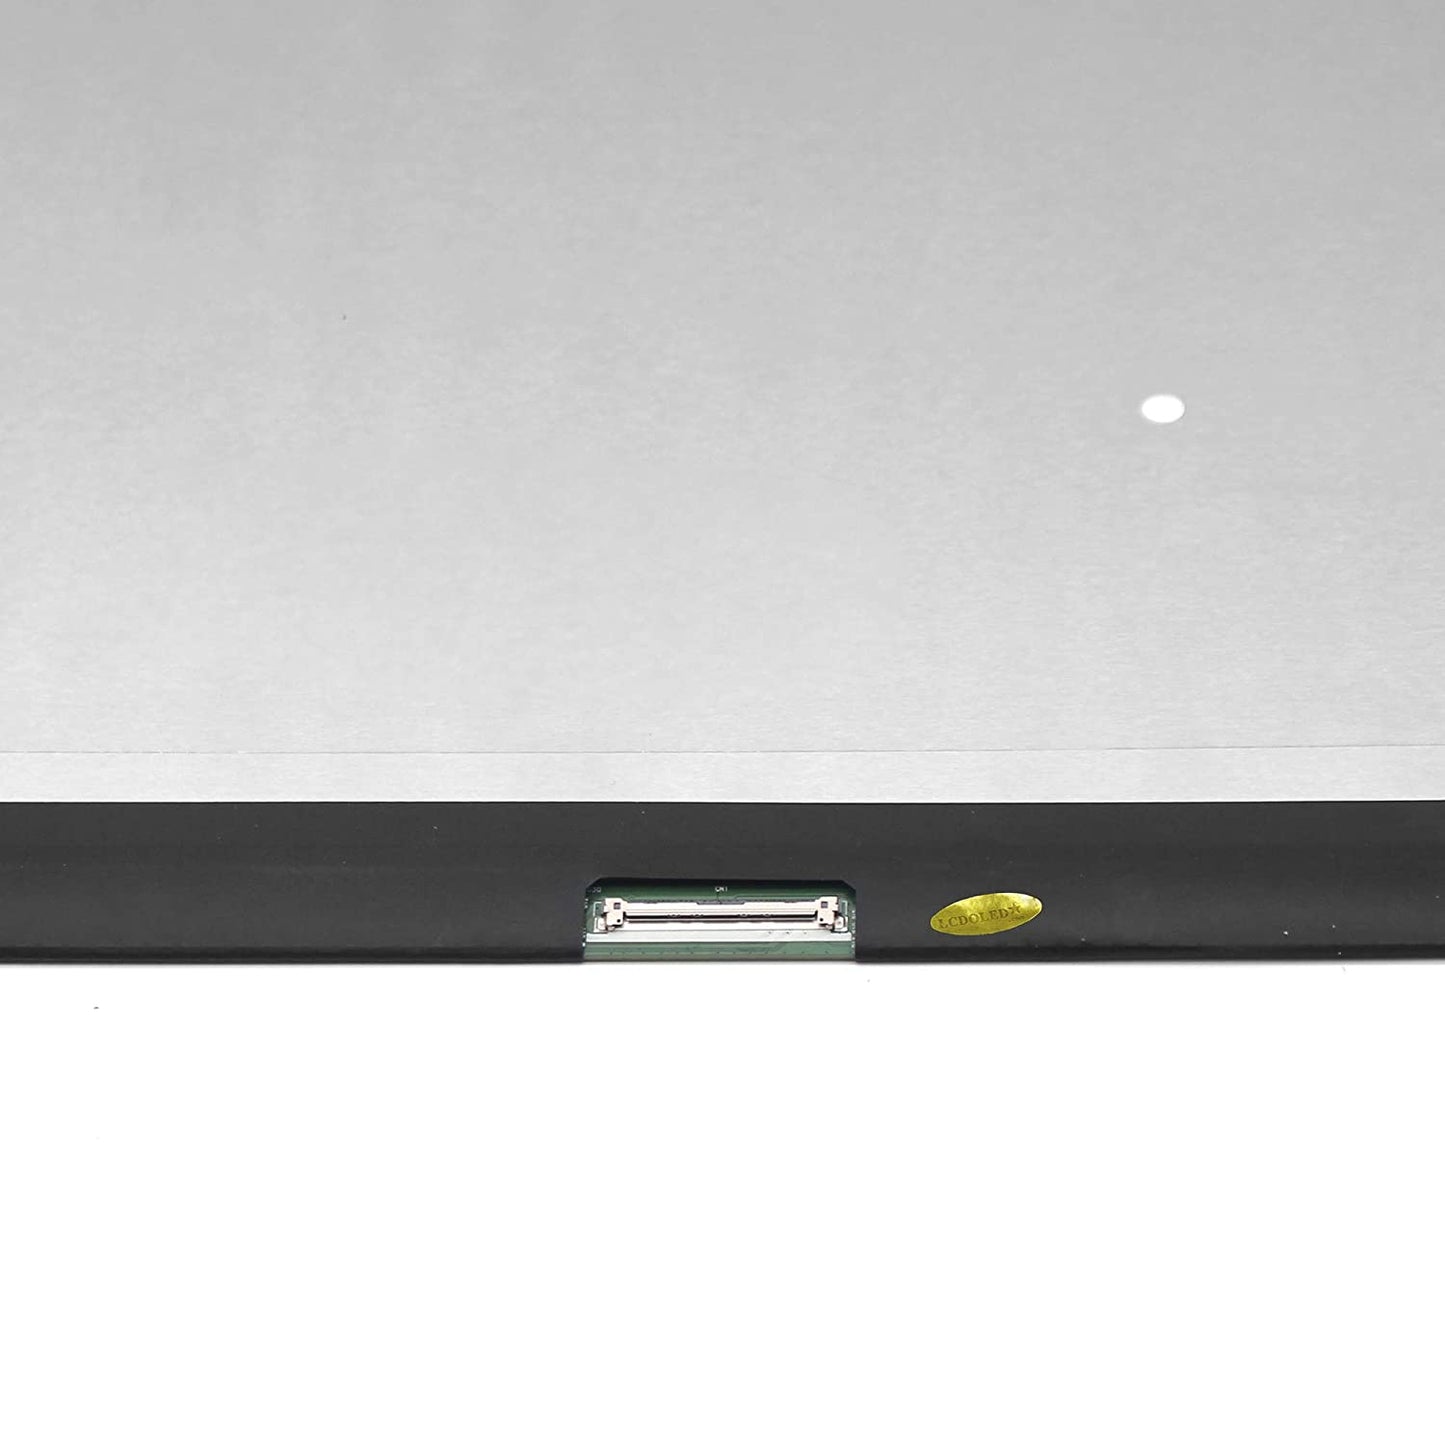 LaptopKing Replacement LCD Screen for B156HAN08.0 B156HAN08.2 B156HAN08.3 B156HAN13.0 LP156WFG-SPB2 LP156WFG(SP)(F2) LP156WFG(SP)(F3) 15.6 inches 144Hz FHD 1080P IPS LCD